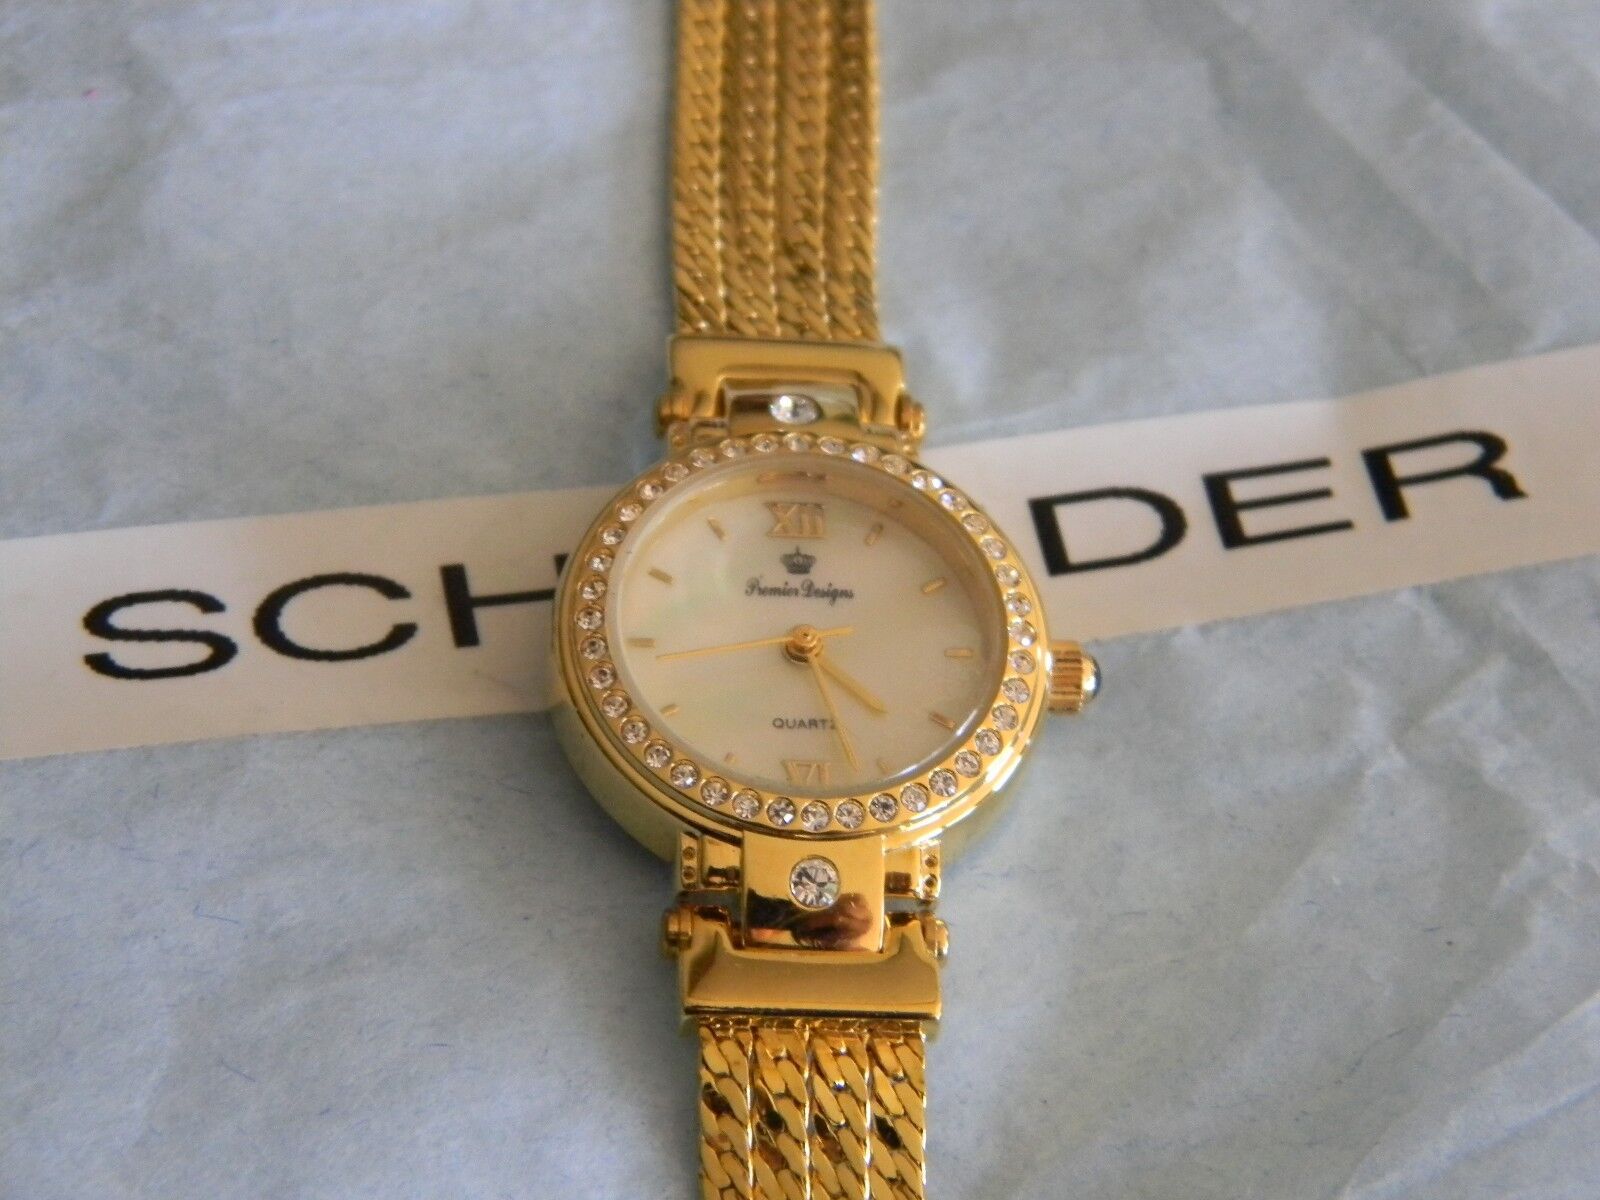 Premier Designs ITALY yellow gold crystal strand watch RV $86 FREE ship new 